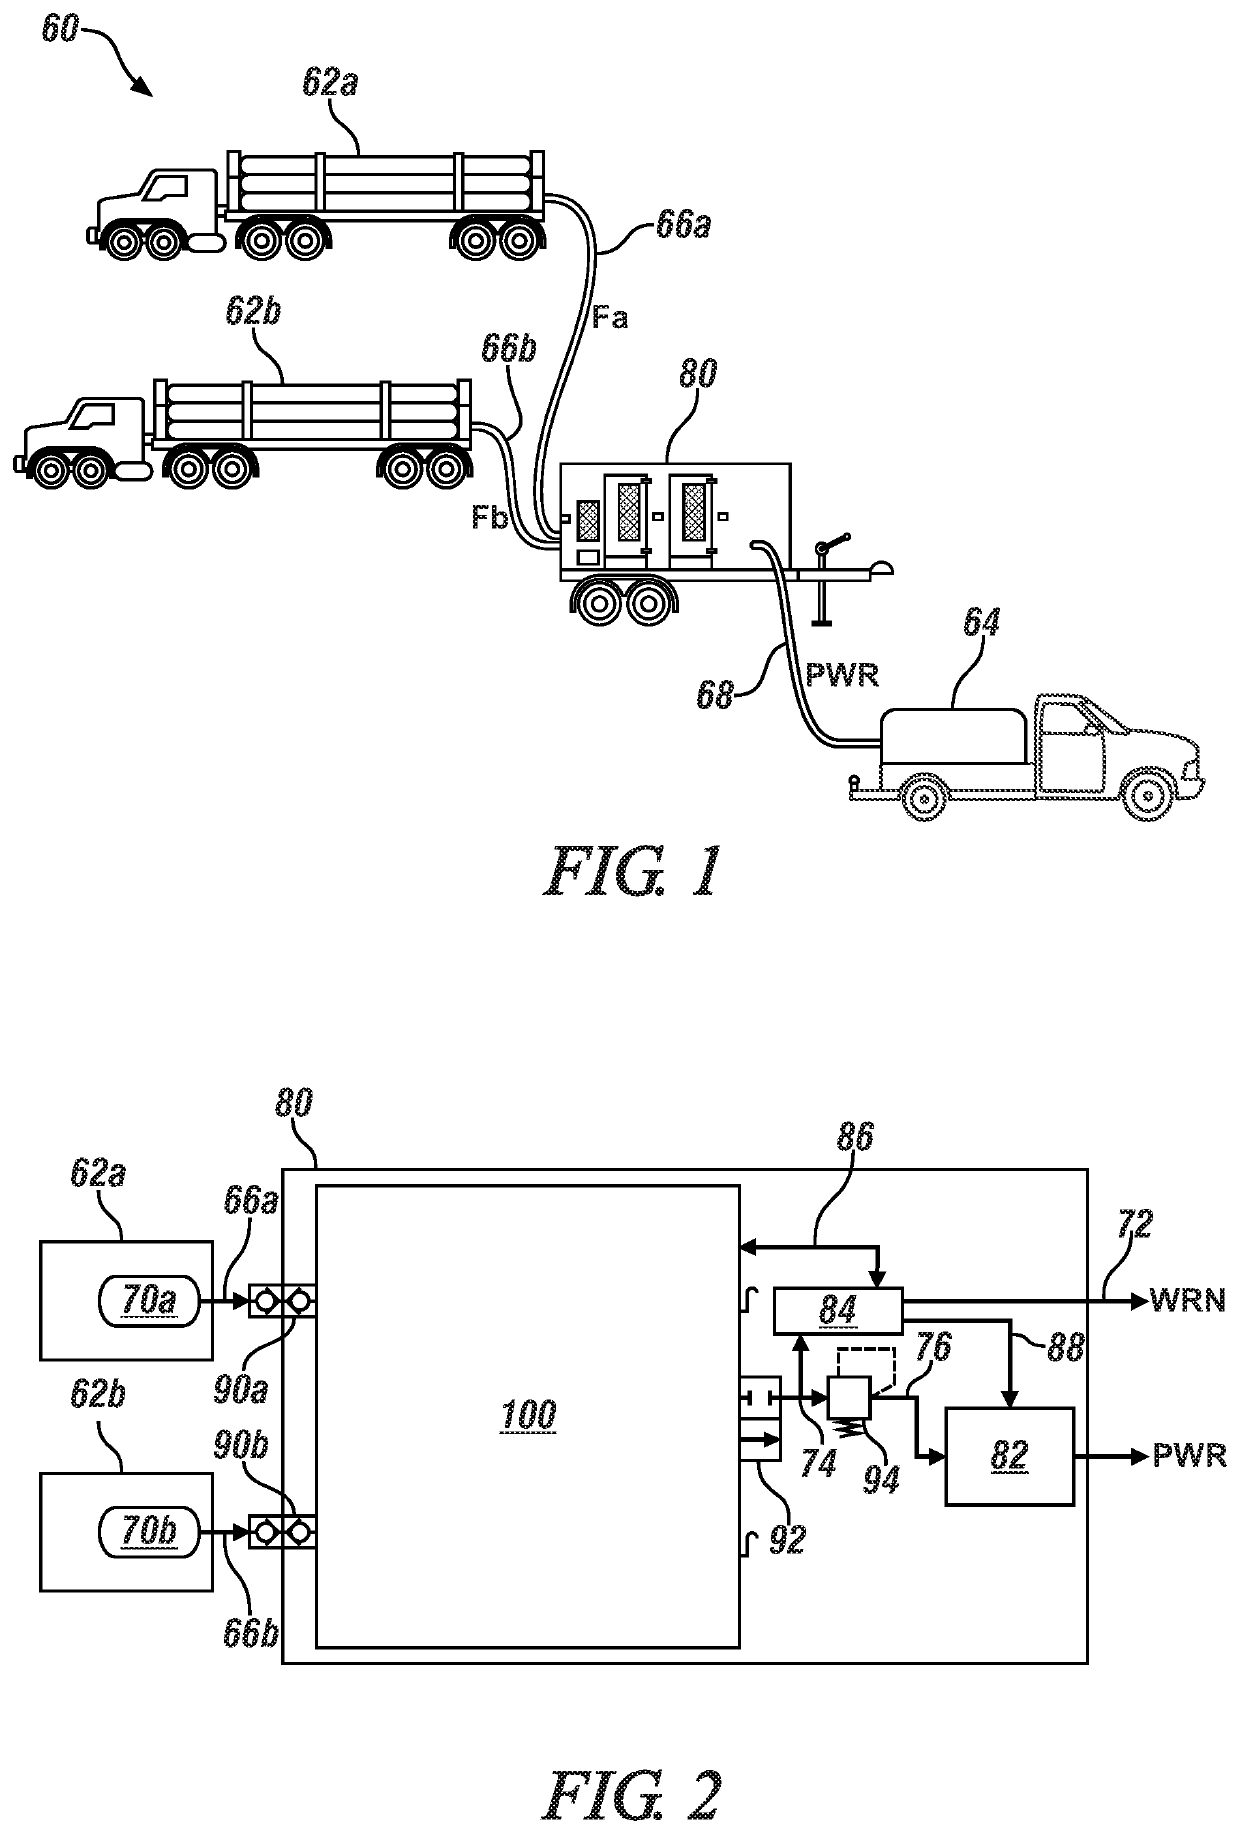 Automated mobile compressed hydrogen fuel source management for mobile power generation applications